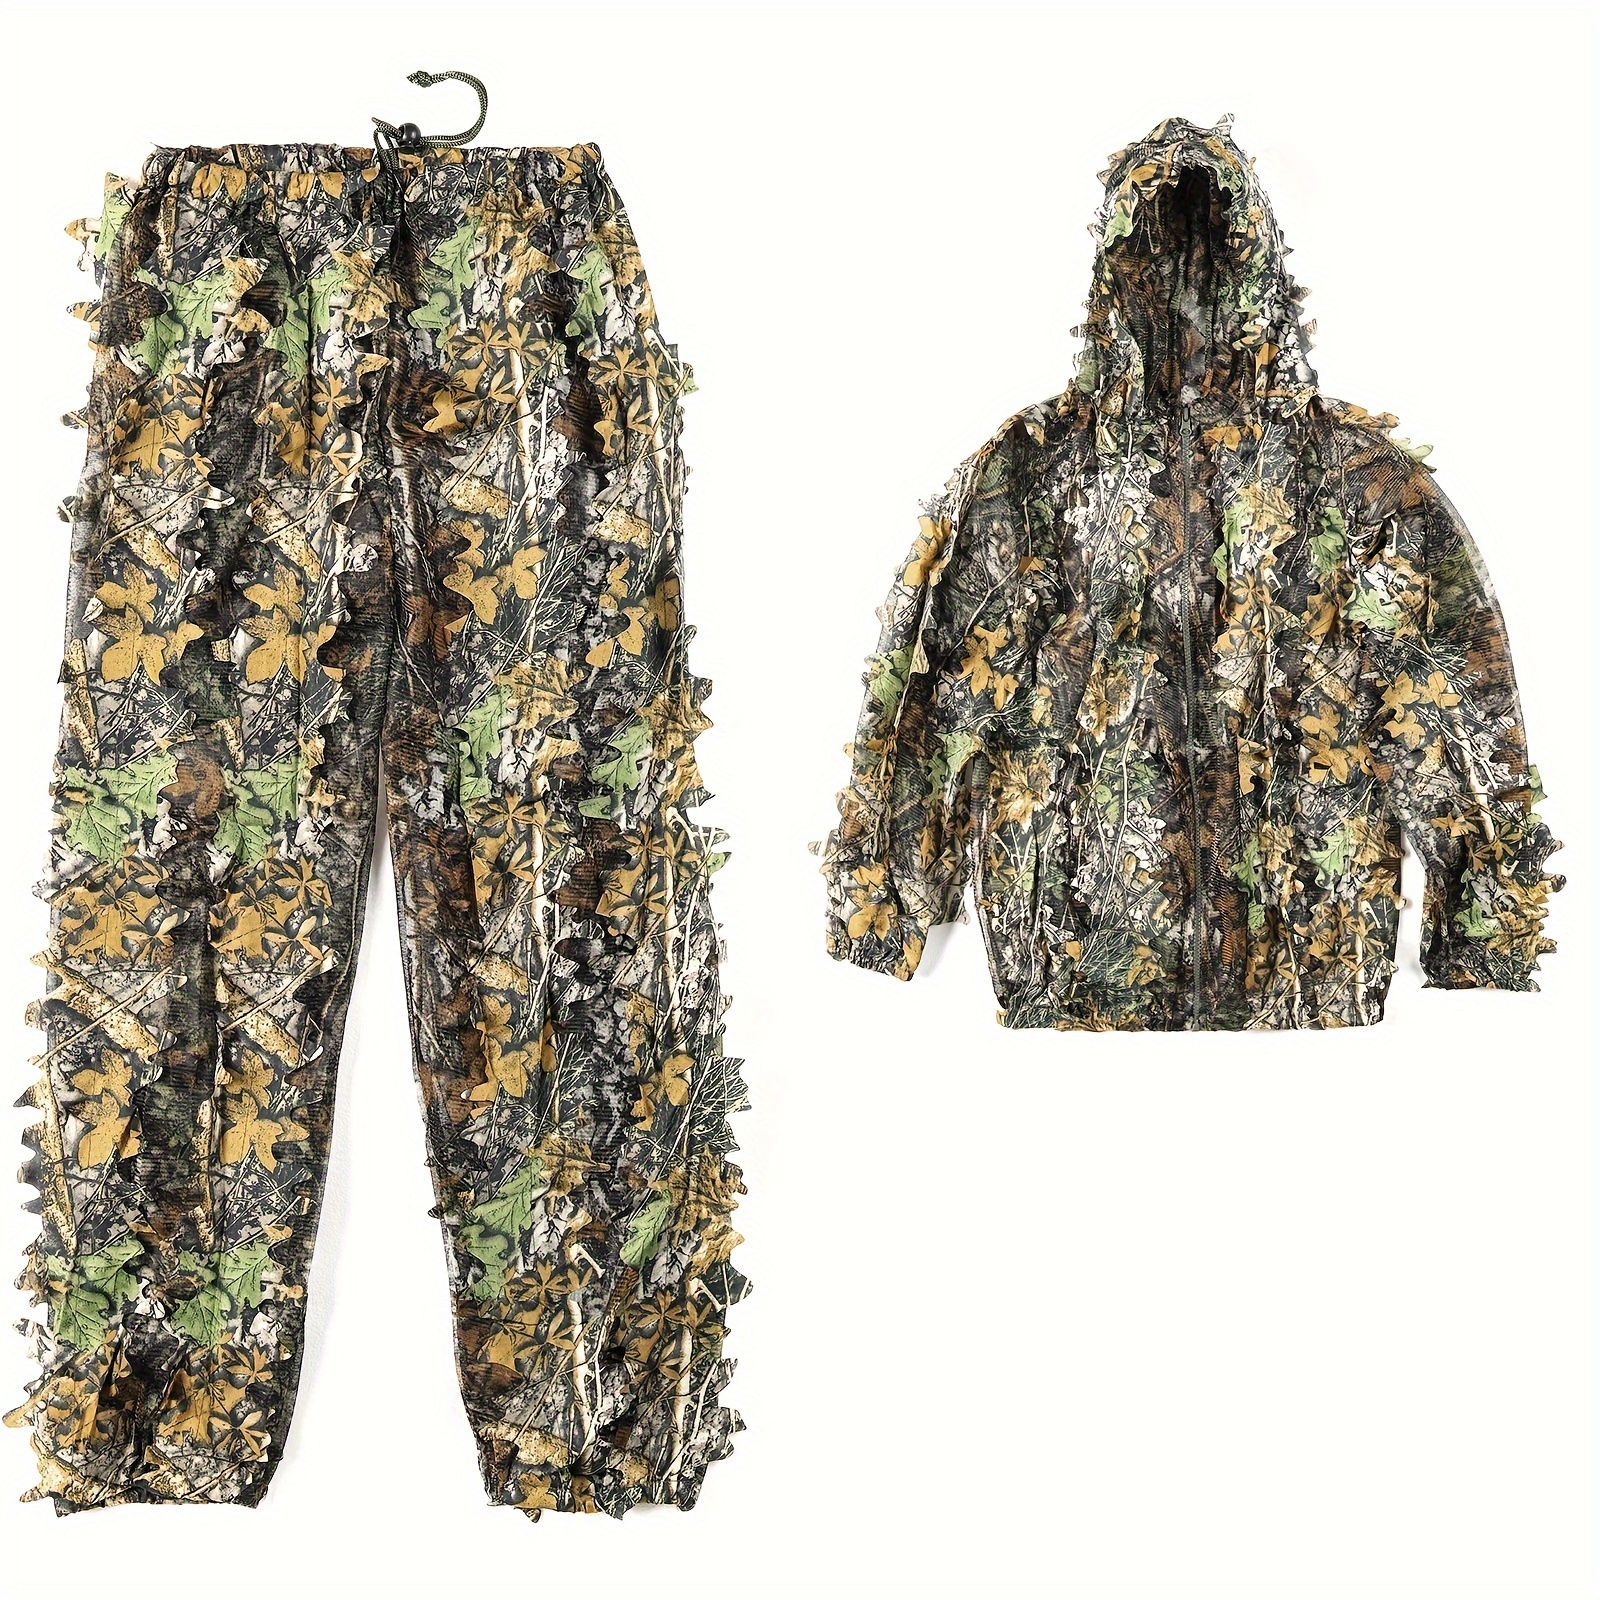 

Lightweight 3d Green Leaf Camouflage Ghillie Suit - Perfect For Outdoor Games And Halloween Costumes, Wildlife Photography Camouflage Suit